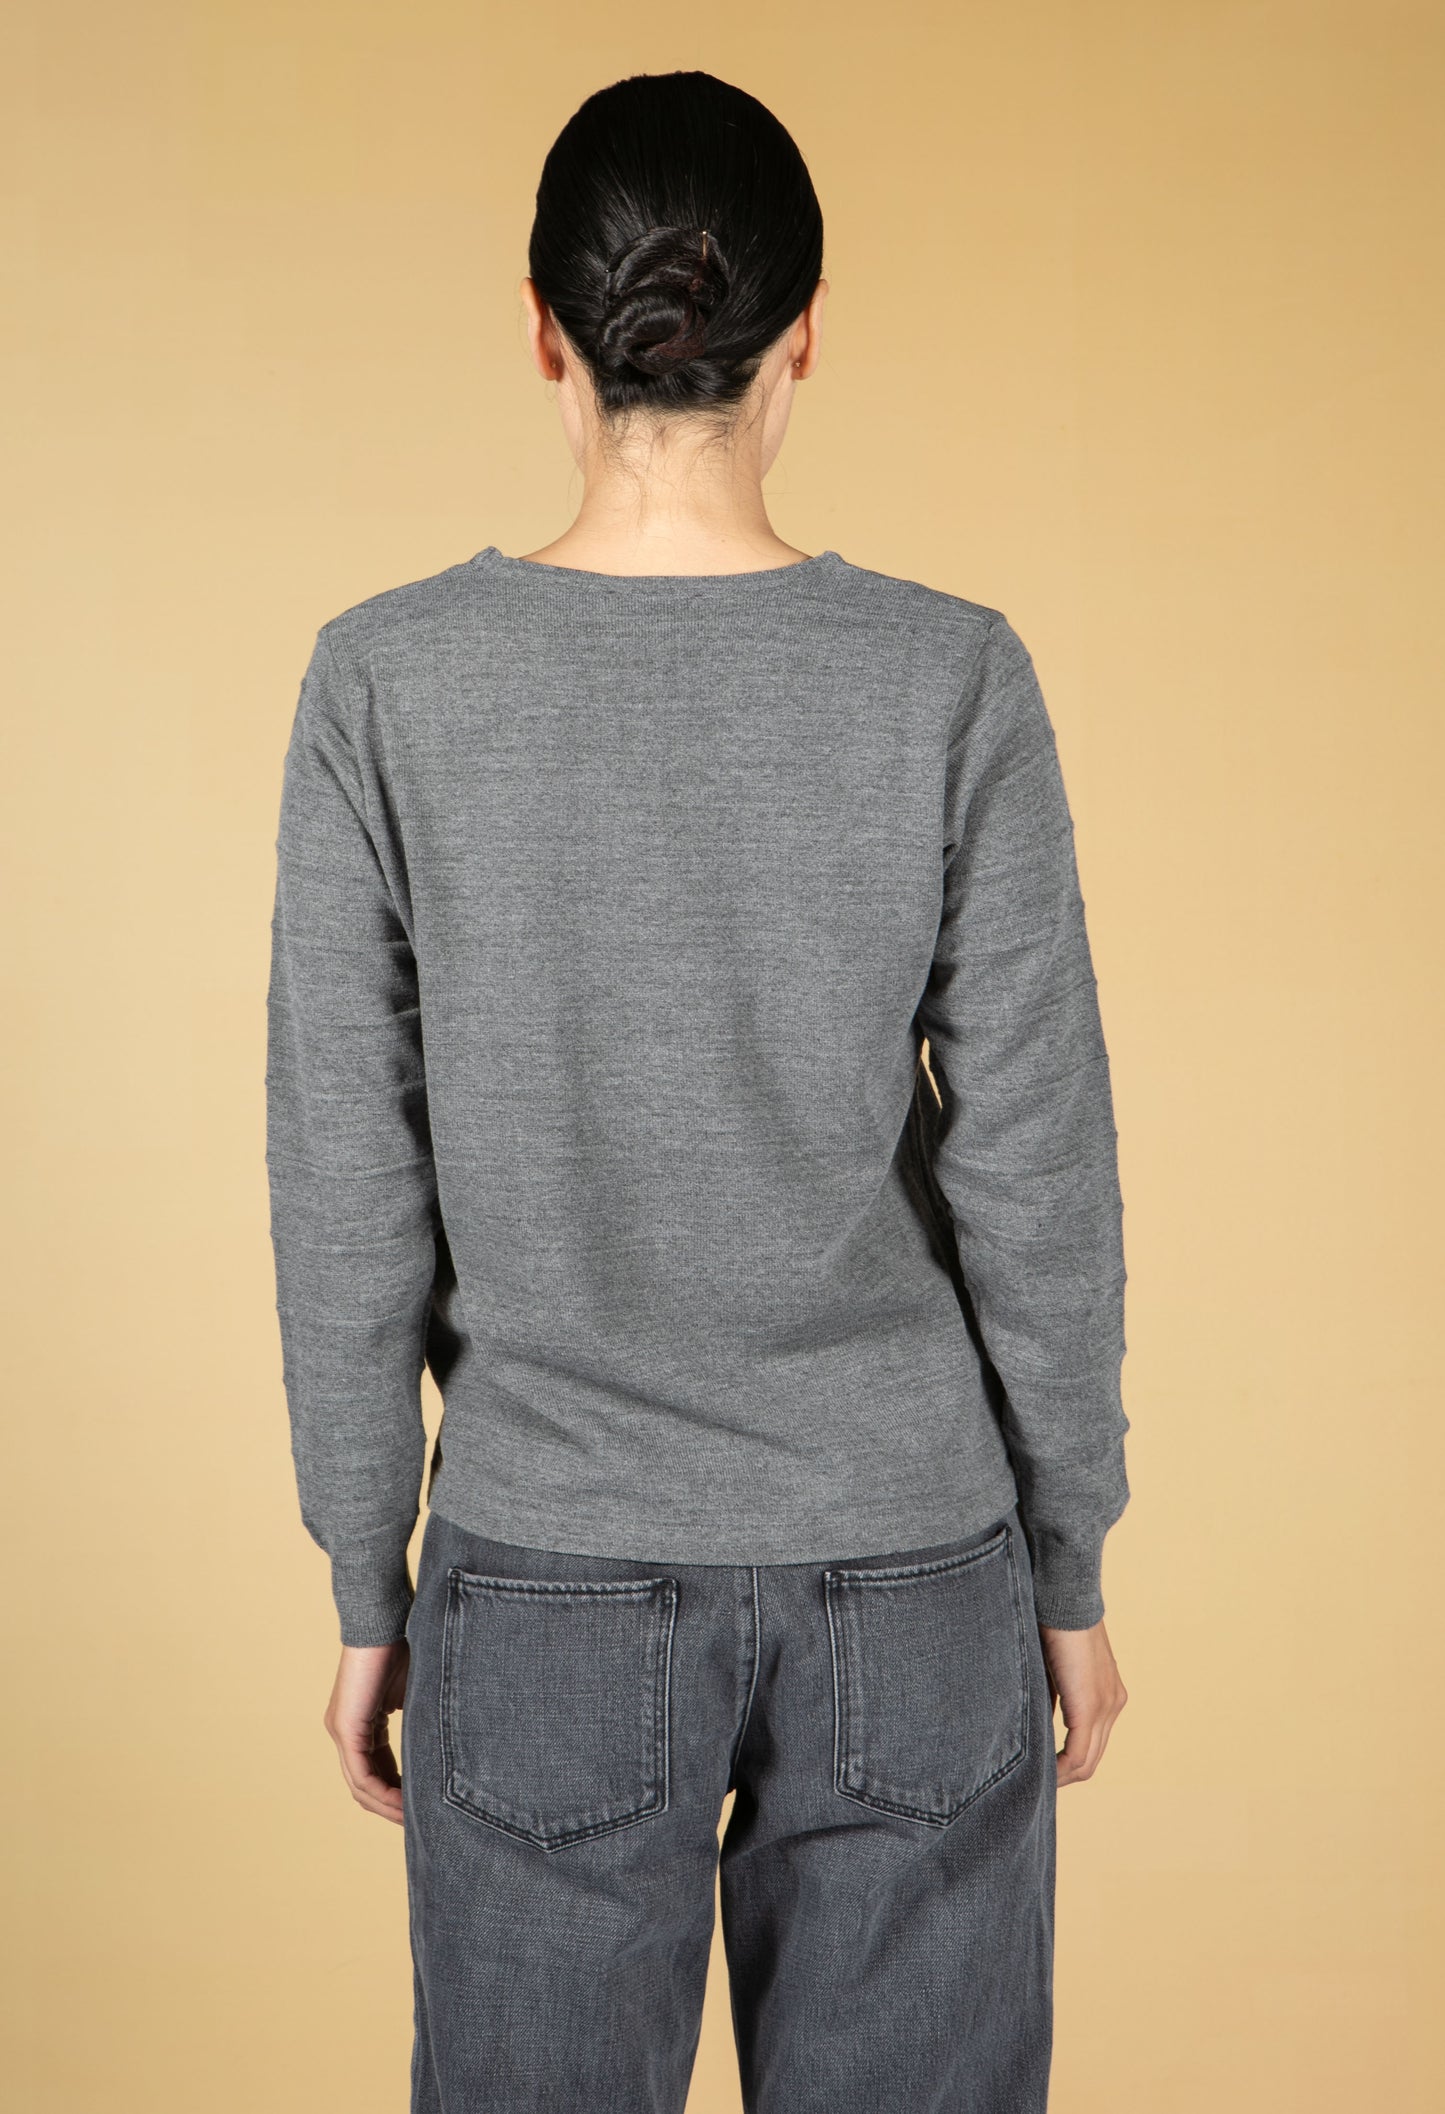 Grey Textured Knitted Pullover